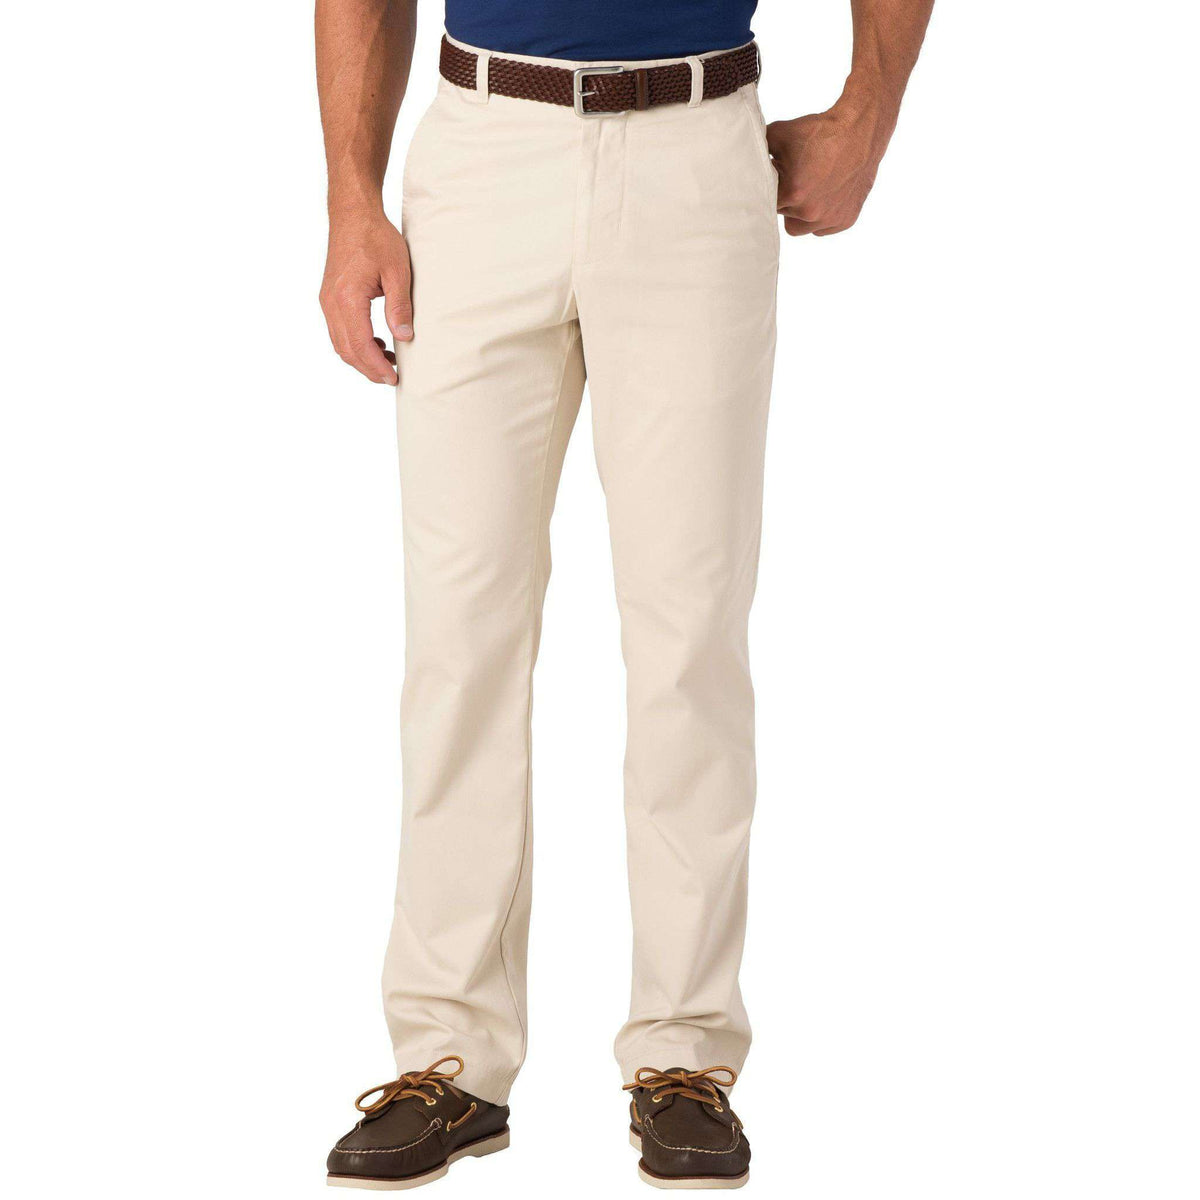 Skipjack Classic Fit Pant in Stone by Southern Tide - Country Club Prep